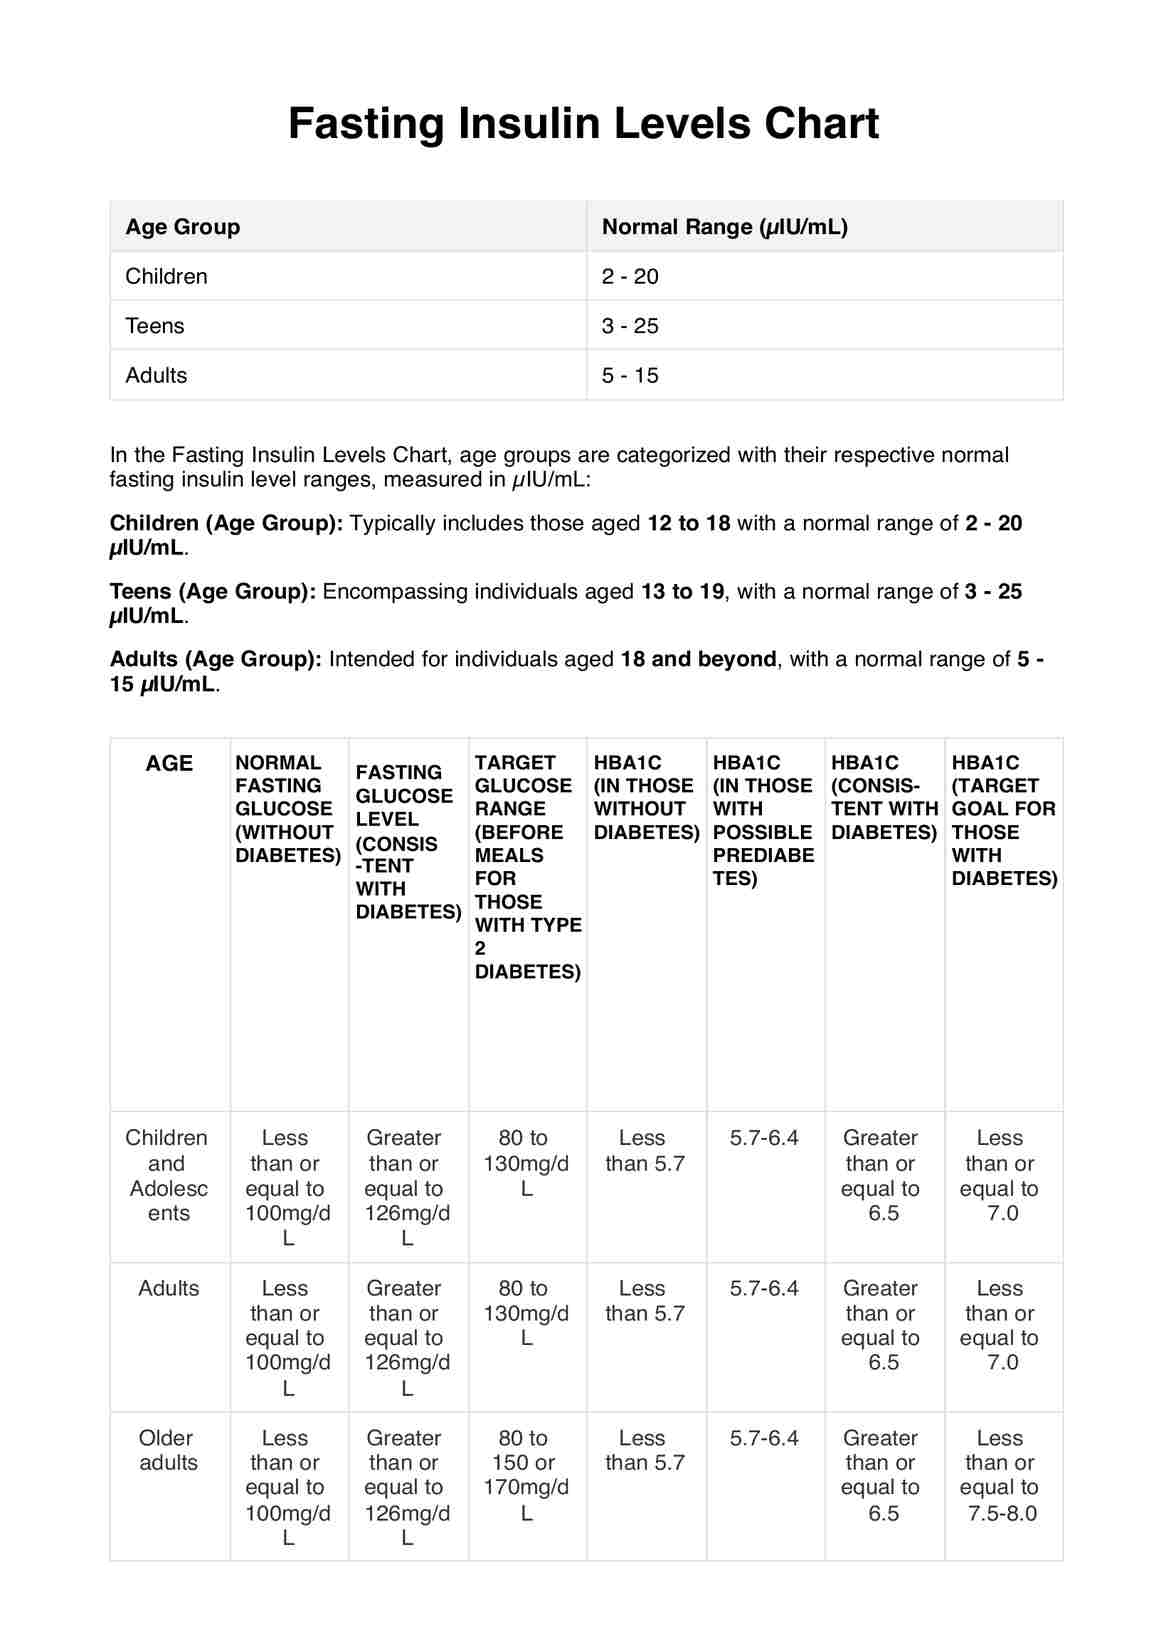 Fasting Insulin Levels PDF Example